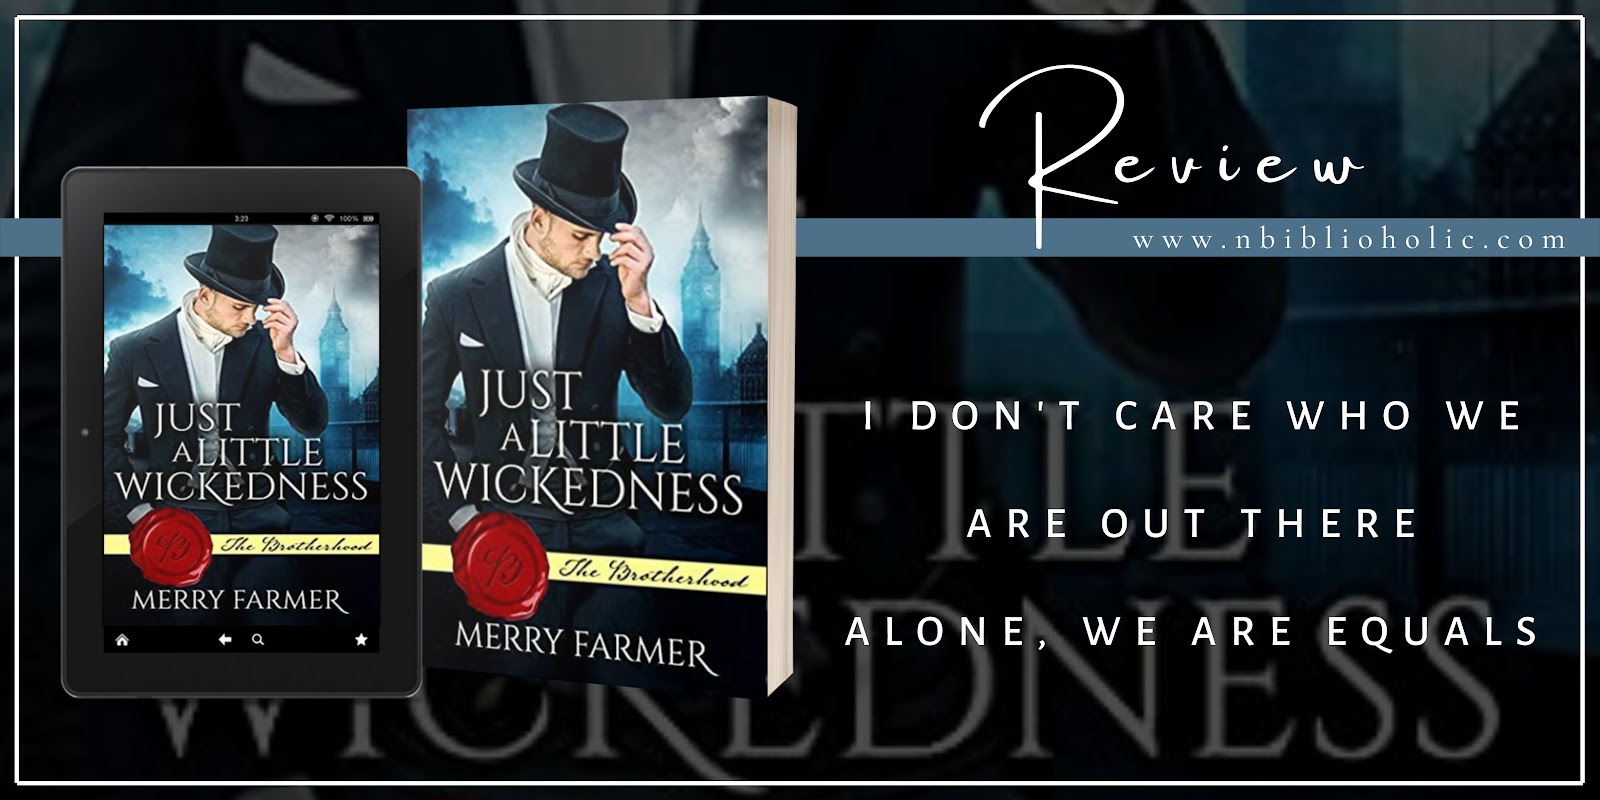 Just a Little Wickedness by Merry Farmer